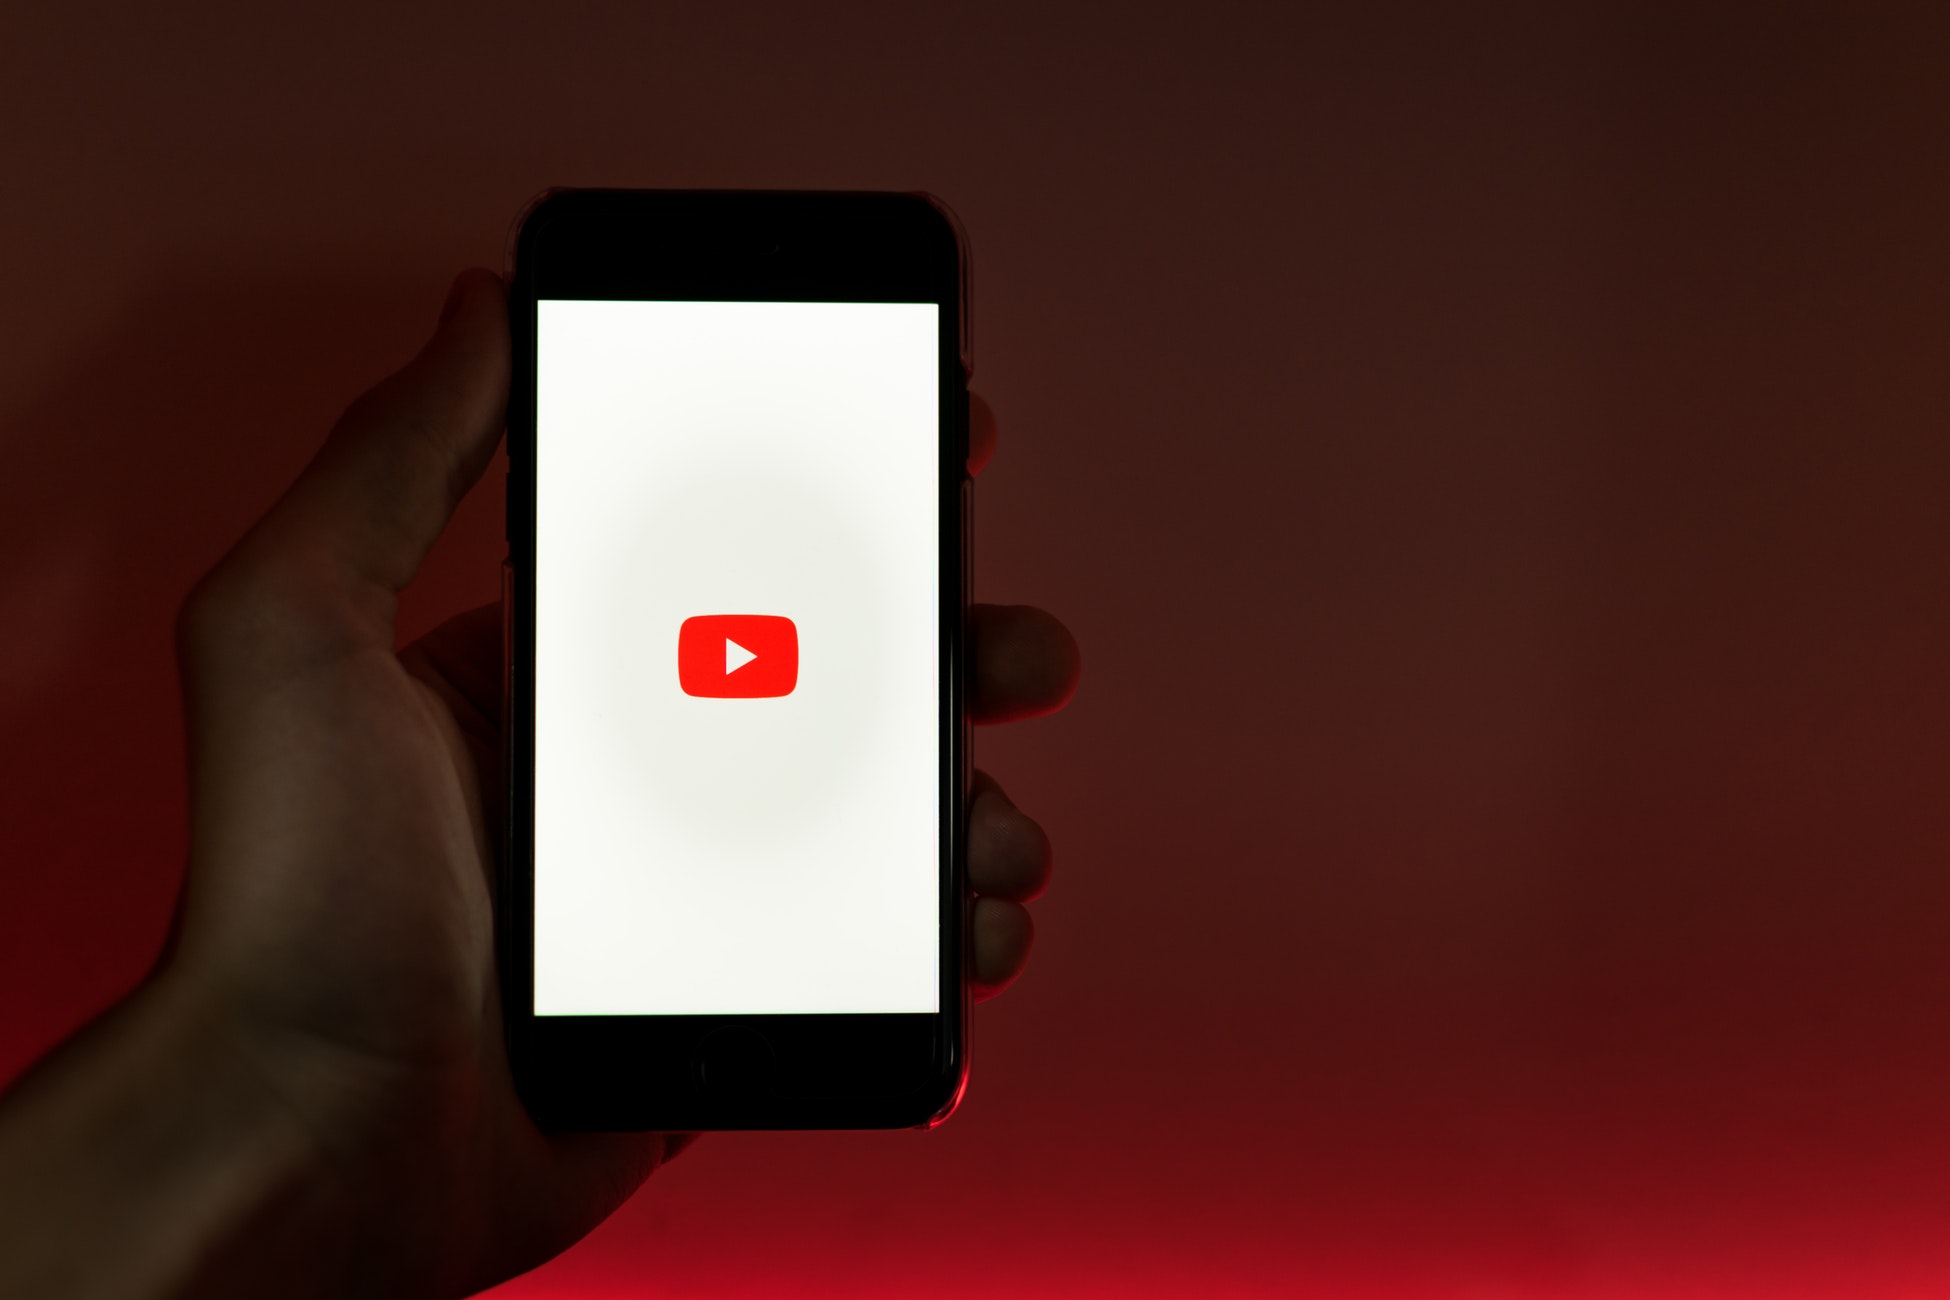 YouTube India claims 60% of its users come from smaller towns